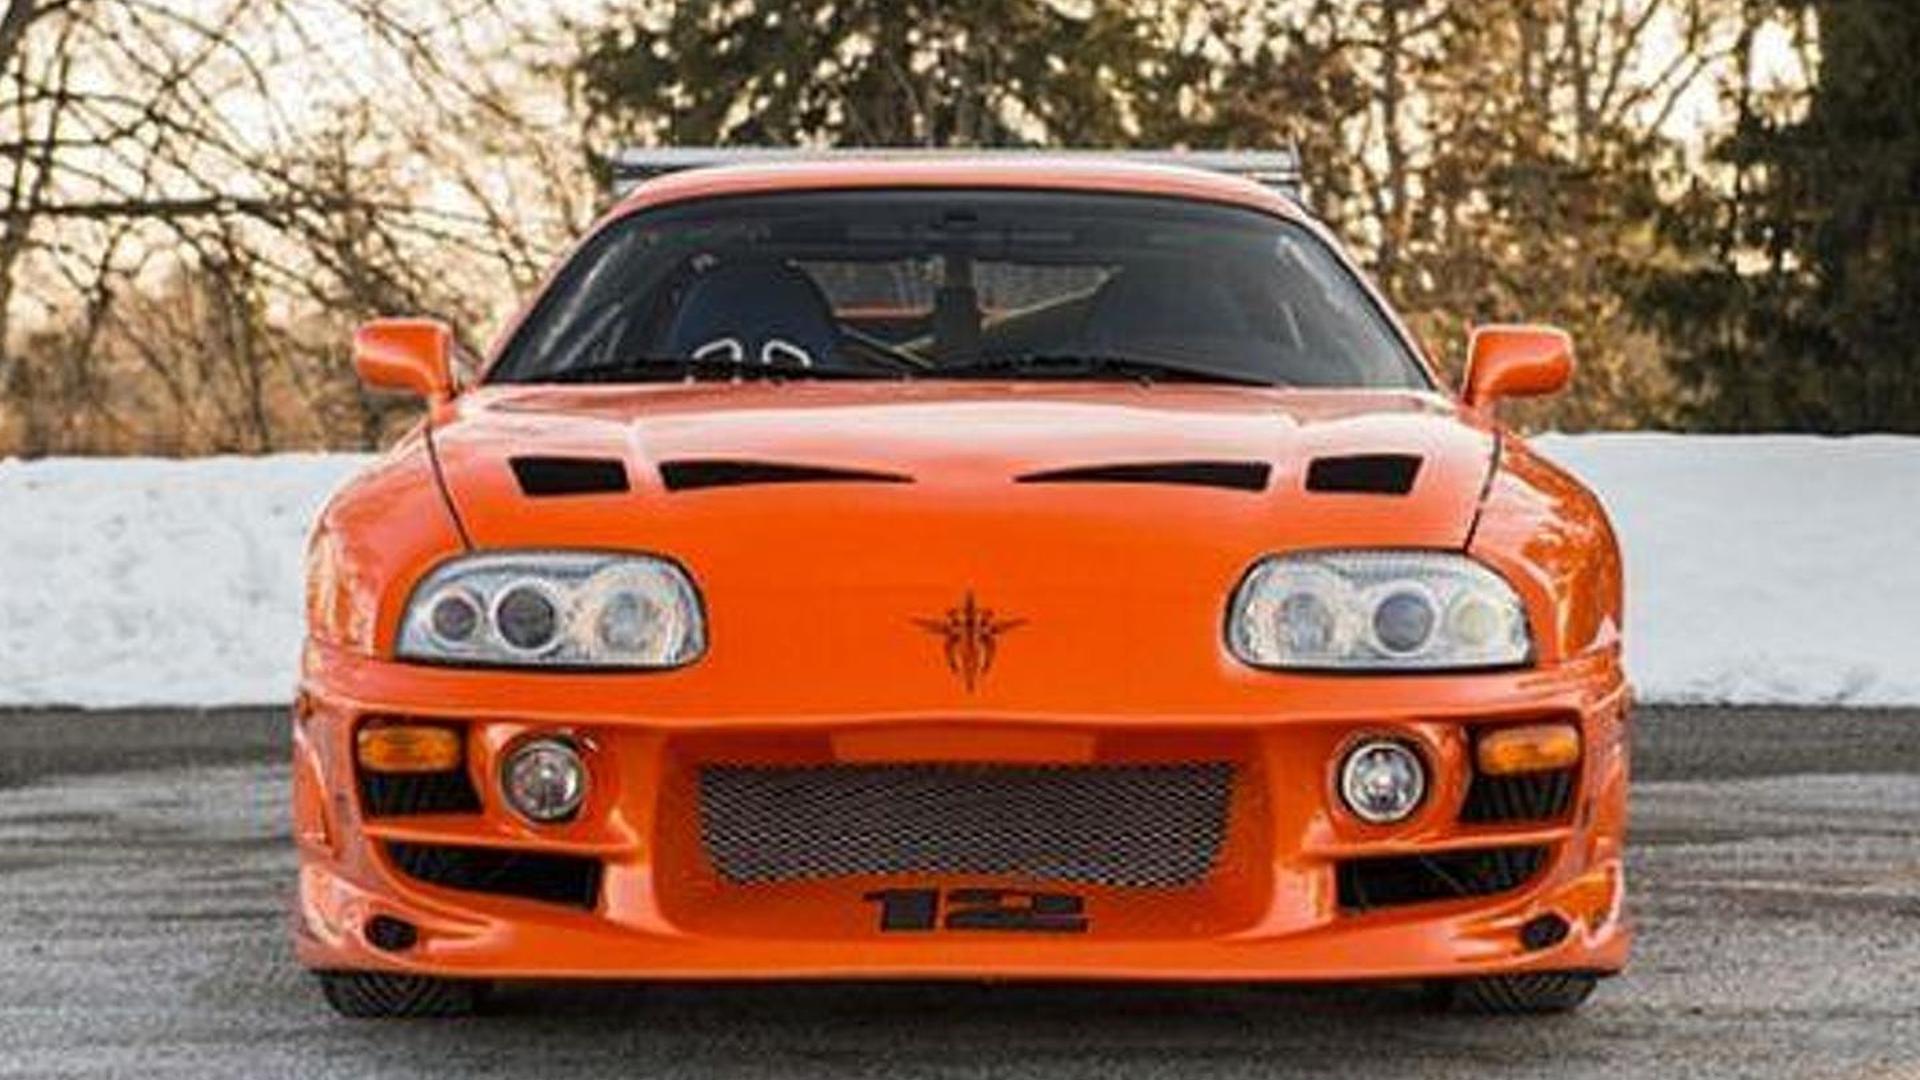 Paul Walker's Toyota Supra from Fast and Furious fetches $000